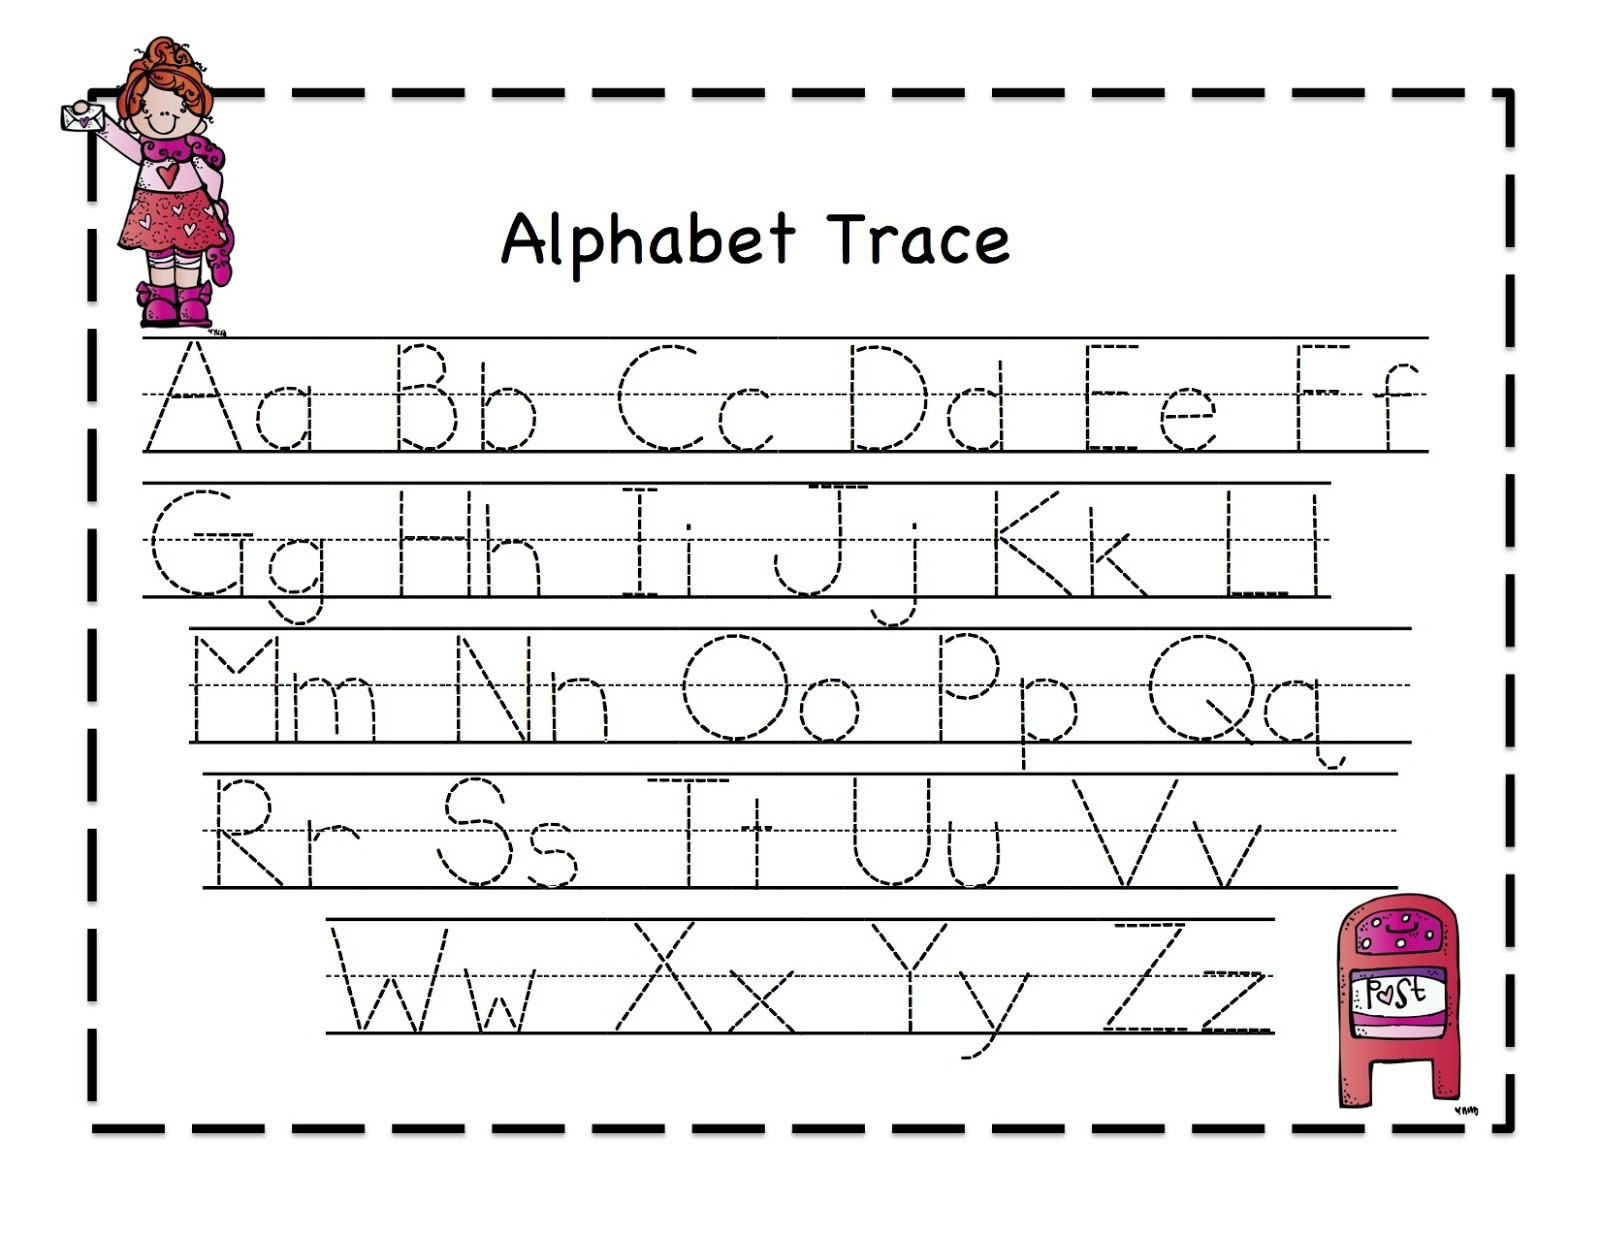 42 Educative Letter Tracing Worksheets | Kittybabylove - Free Printable Alphabet Tracing Worksheets For Kindergarten